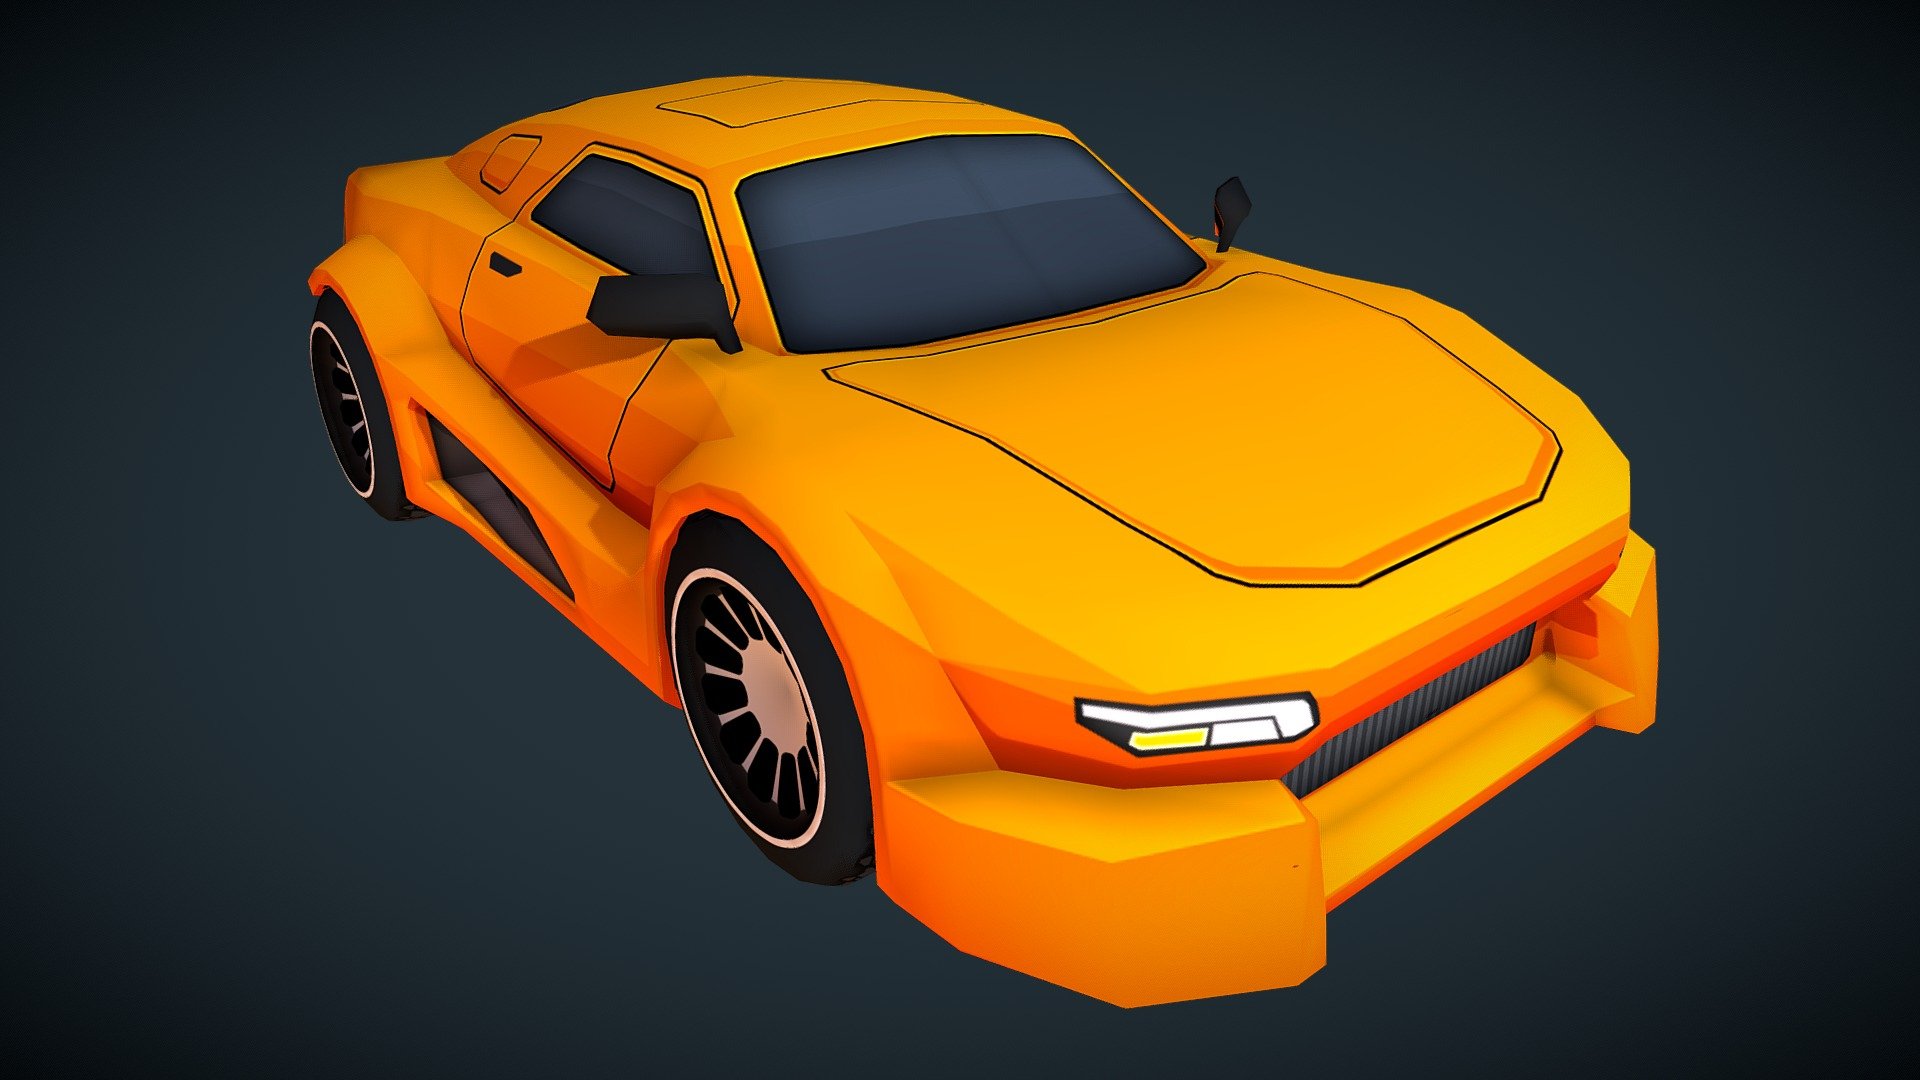 Cartoon style street race car.



Available in Unity Asset store. To find out more, visit my web page &ldquo;aminteractive.eu